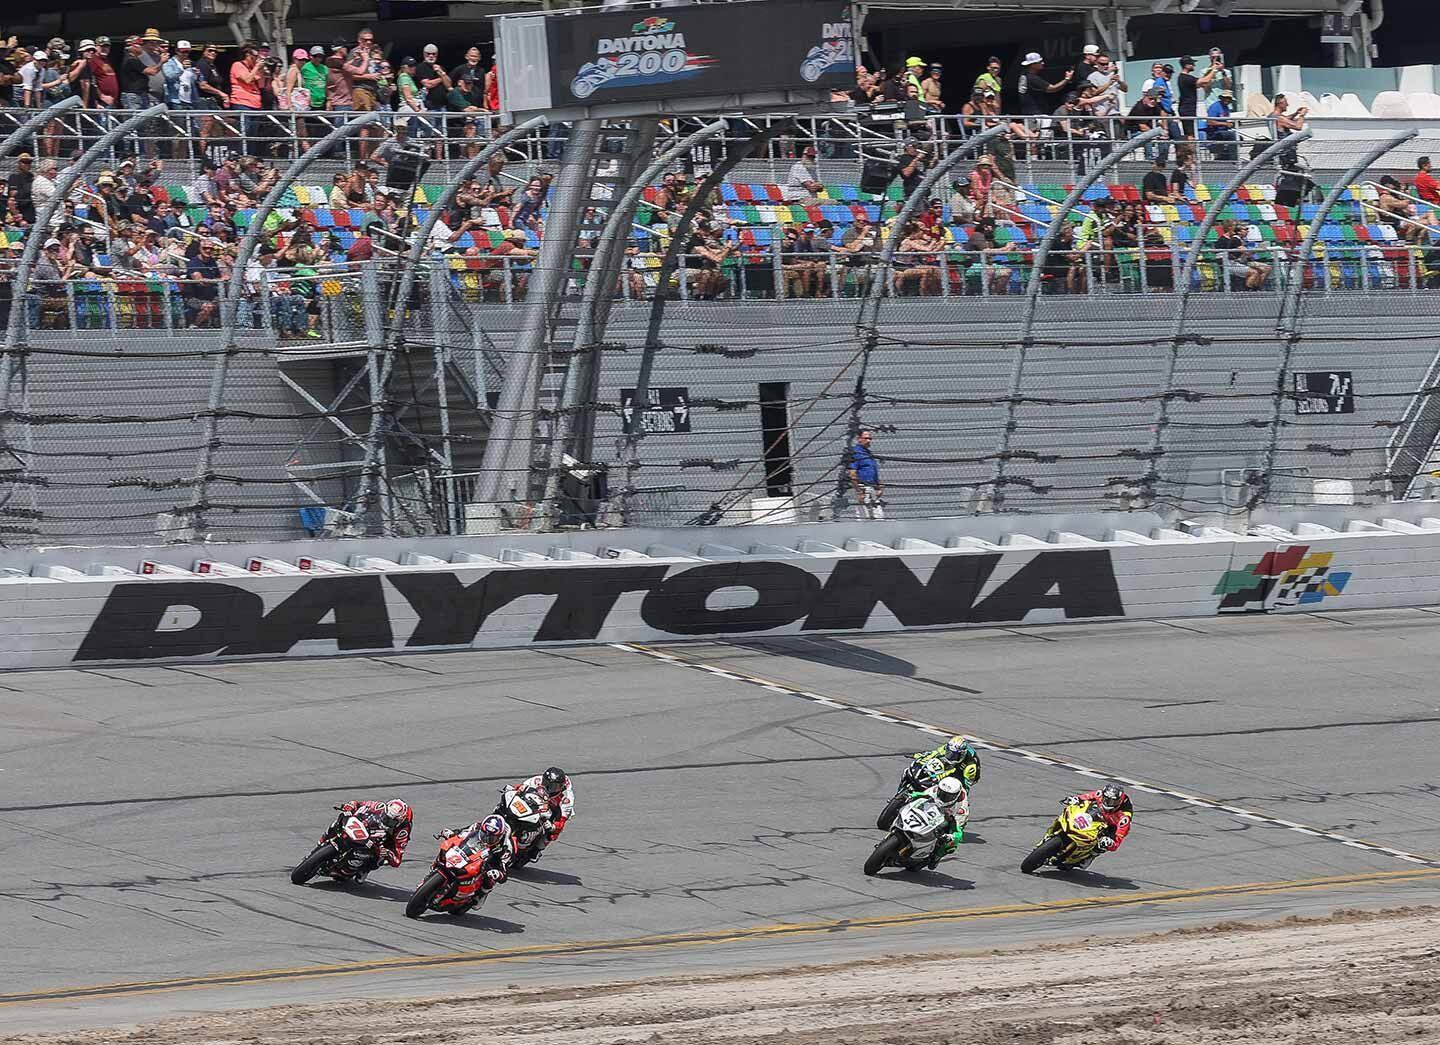 This year’s Daytona 200 was a classic, with Josh Herrin capturing the win after 57 laps and two pit stops. This year’s running saw five motorcycle manufacturers and three tire brands featured; it’s one of the few roadraces that doesn’t require the use of just one tire manufacturer.